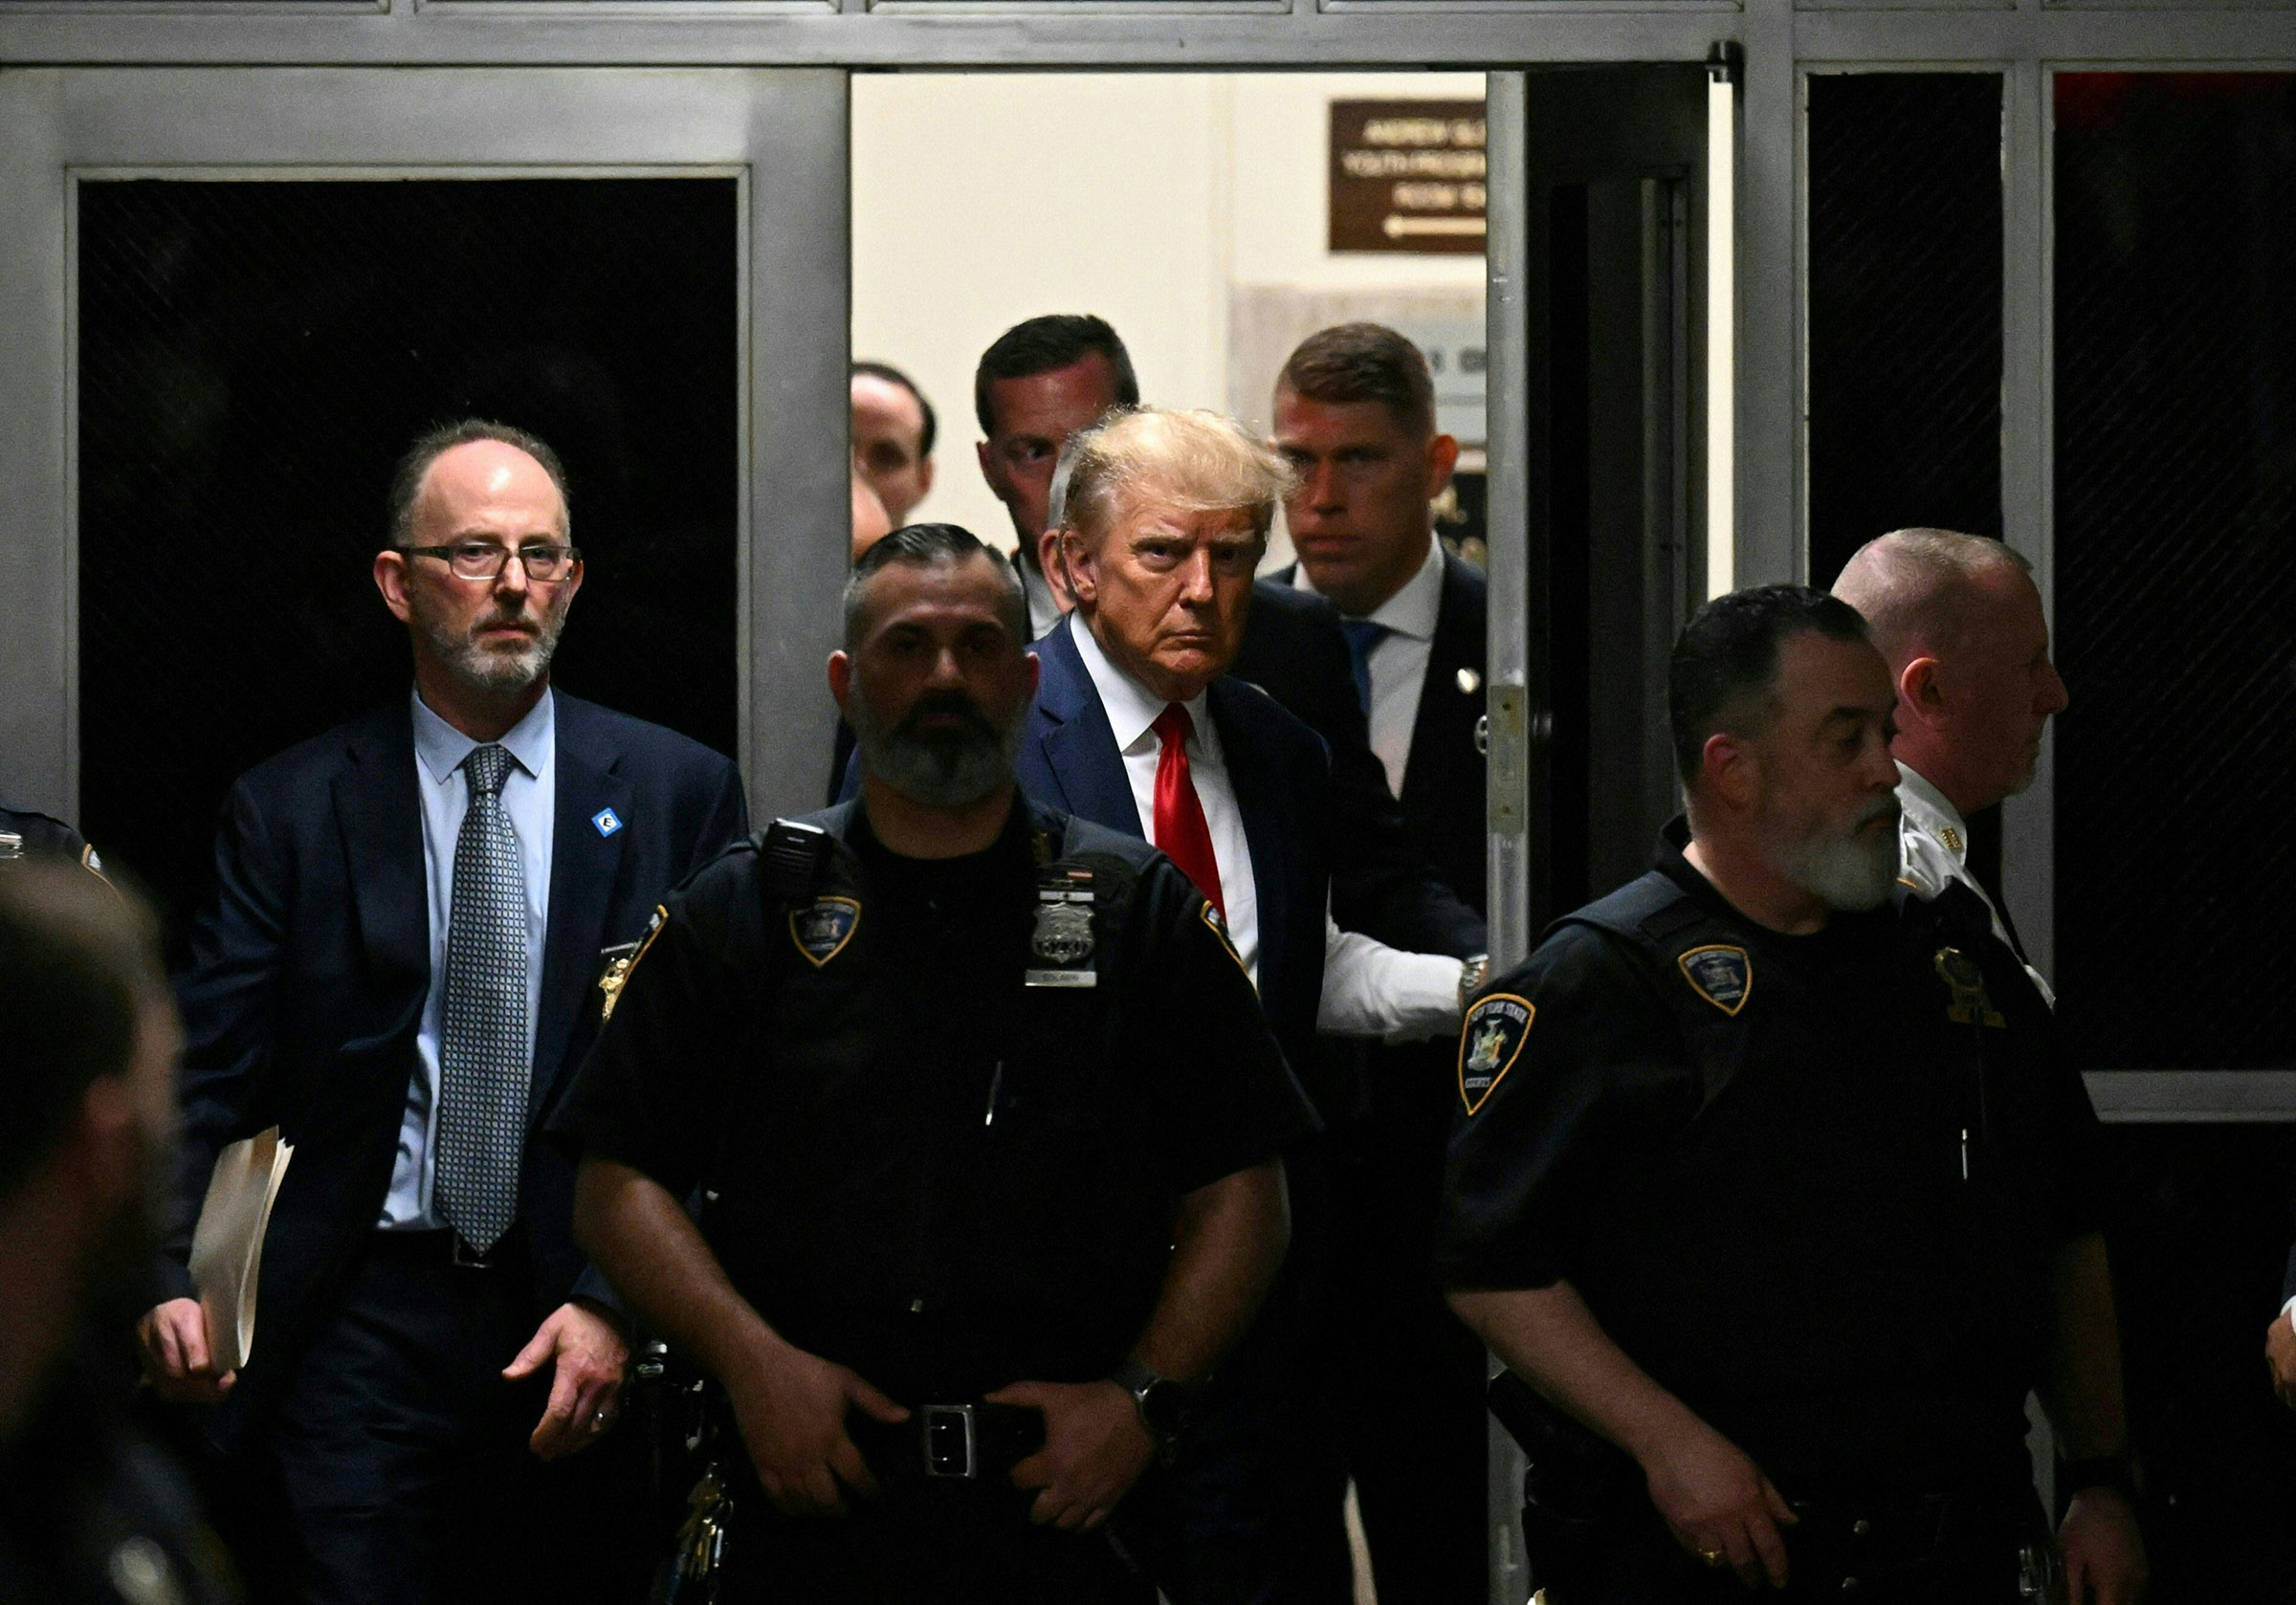 Former President Donald Trump makes his way inside the Manhattan Criminal Courthouse in New York City on April 4, 2023.